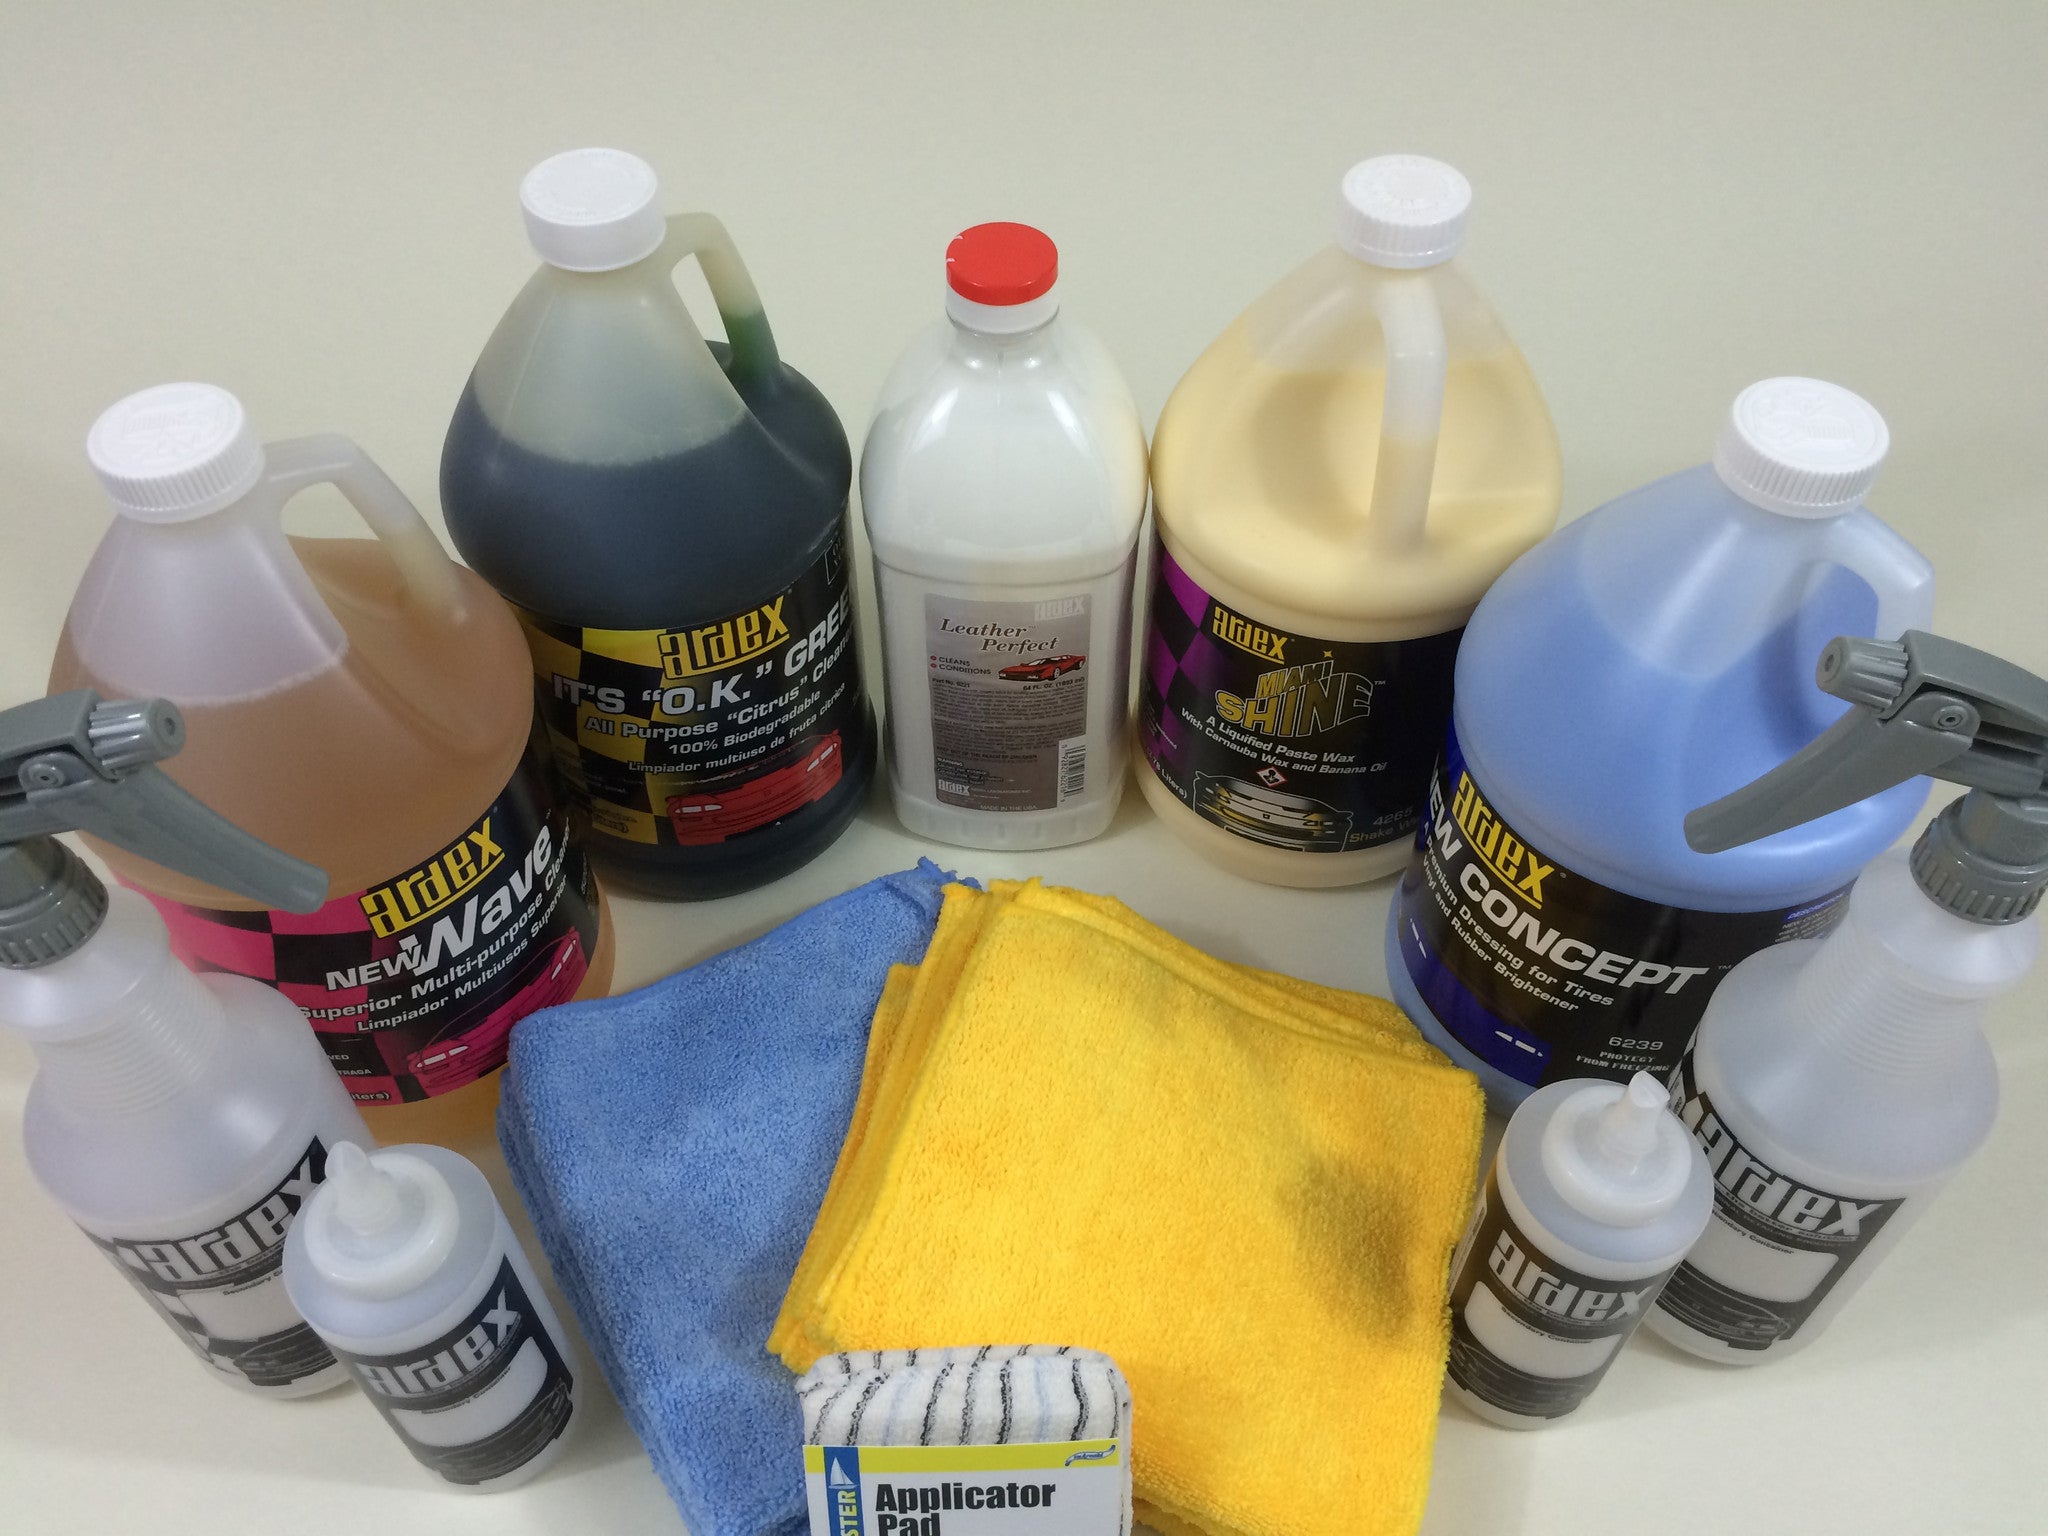 Car Detailing Pro Kit - with Leather Cleaner Conditioner - Ardex